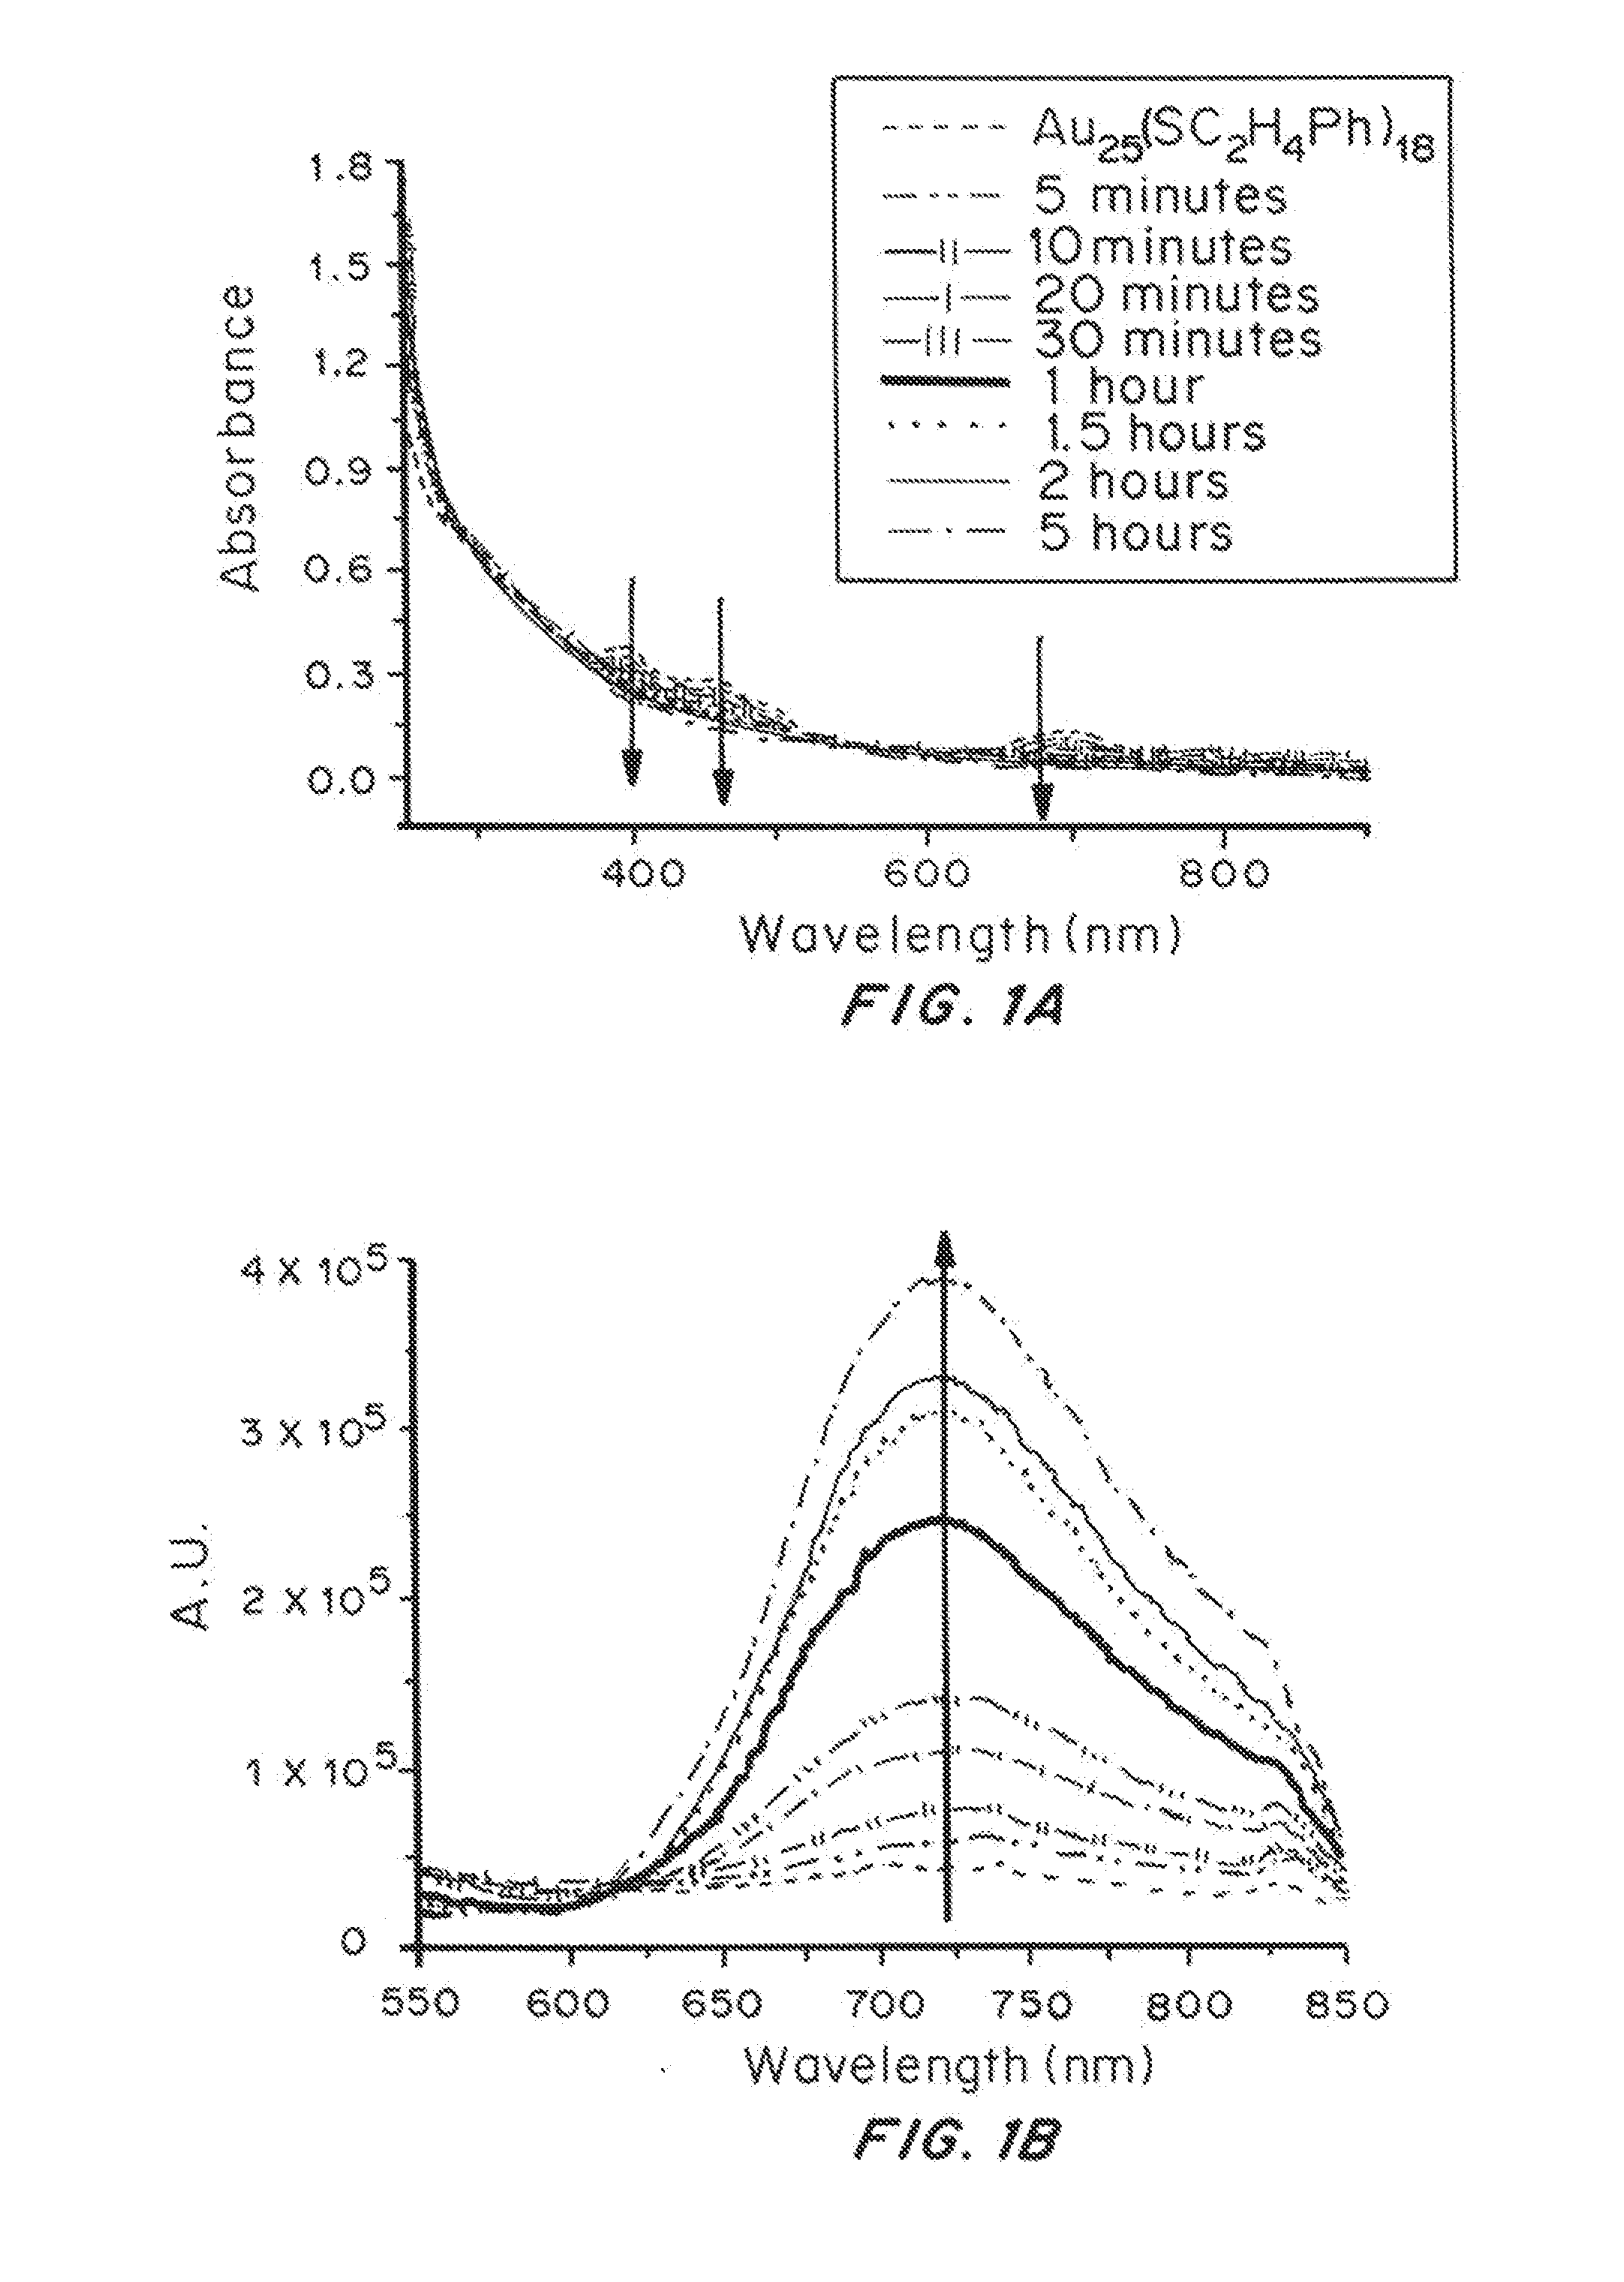 Monolayer Protected Nanoclusters and Methods of Making and Using Thereof